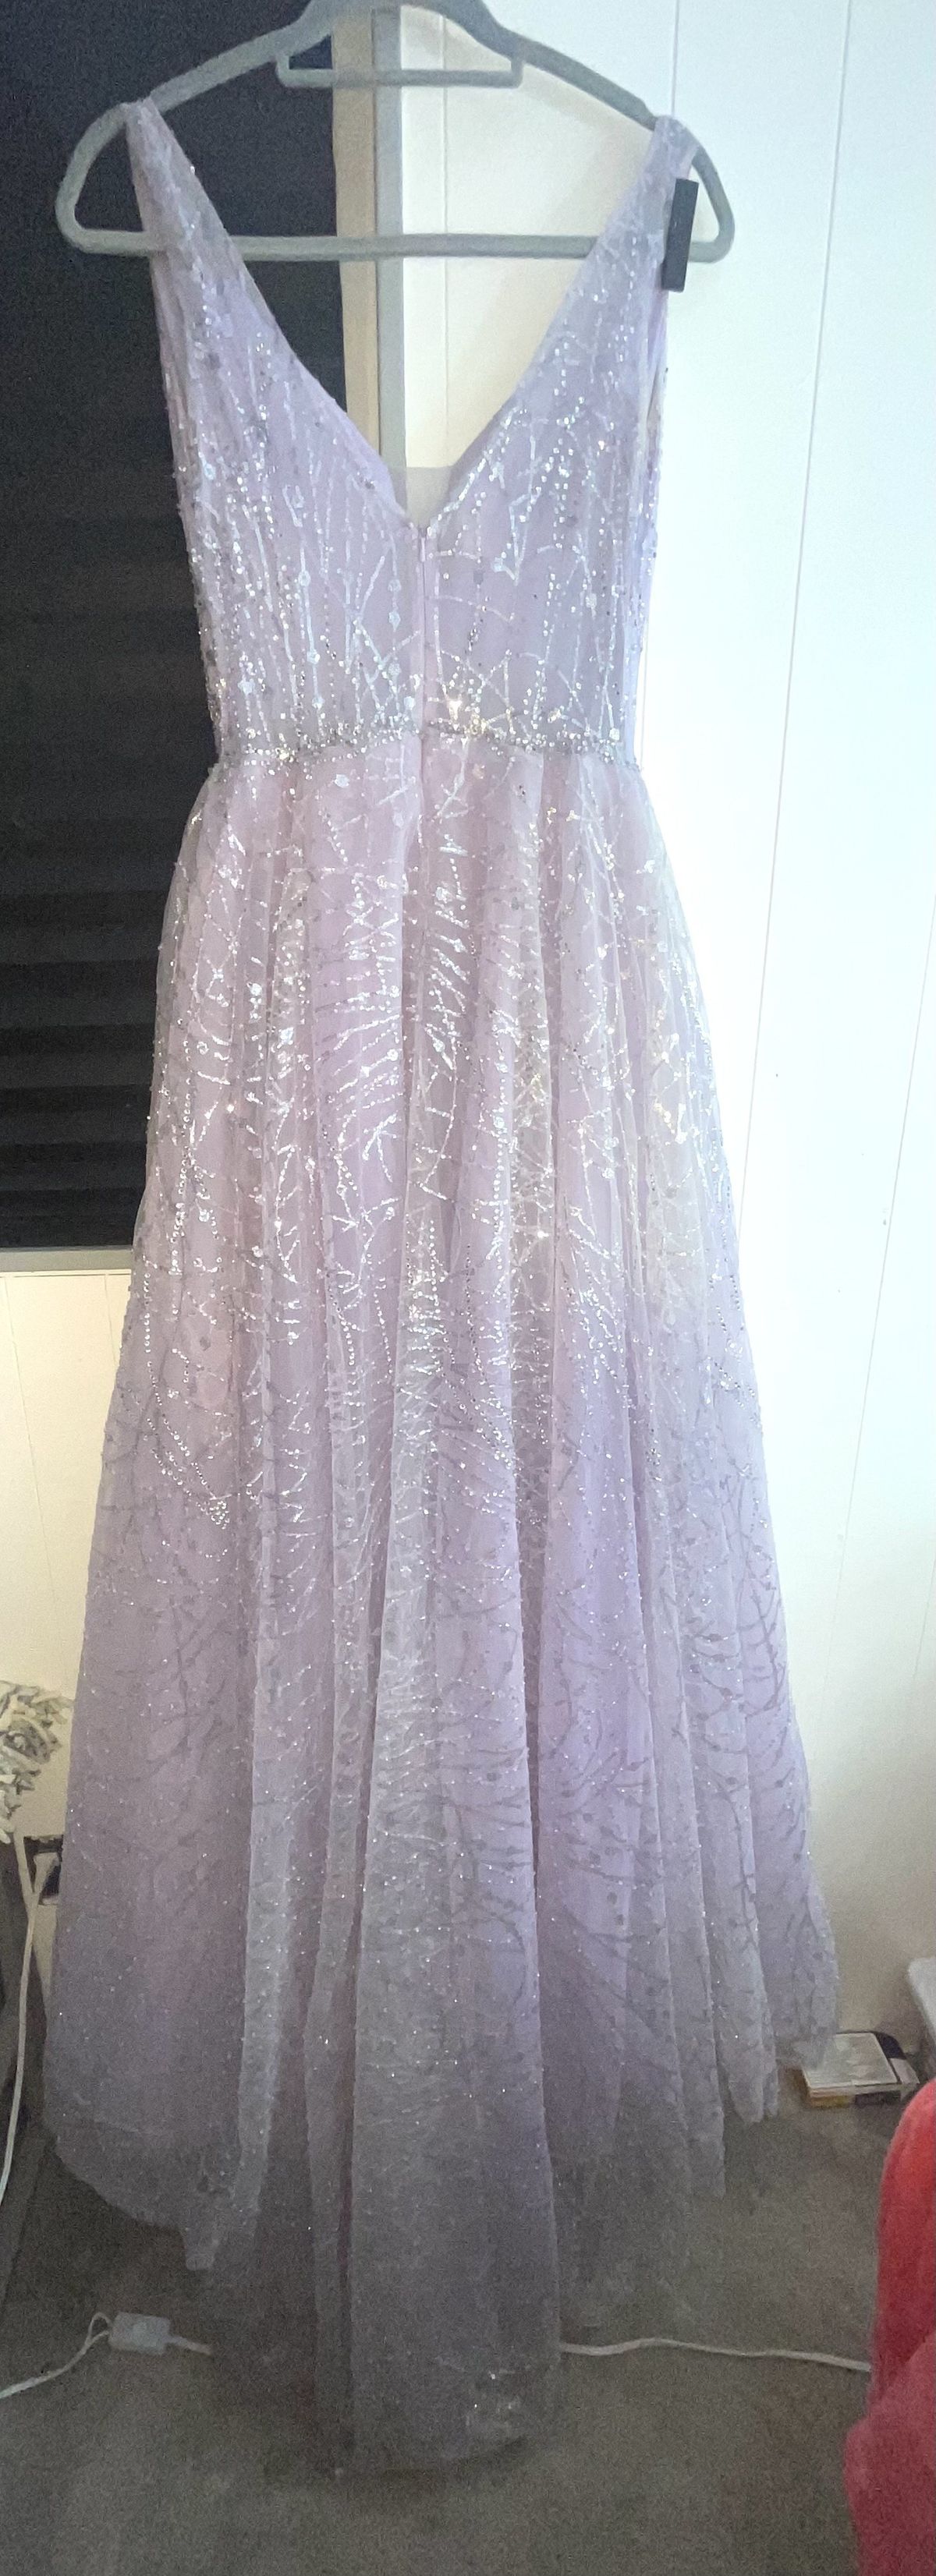 Style 000 Catwalk Couture Size 2 Prom Plunge Sequined Light Purple Side Slit Dress on Queenly